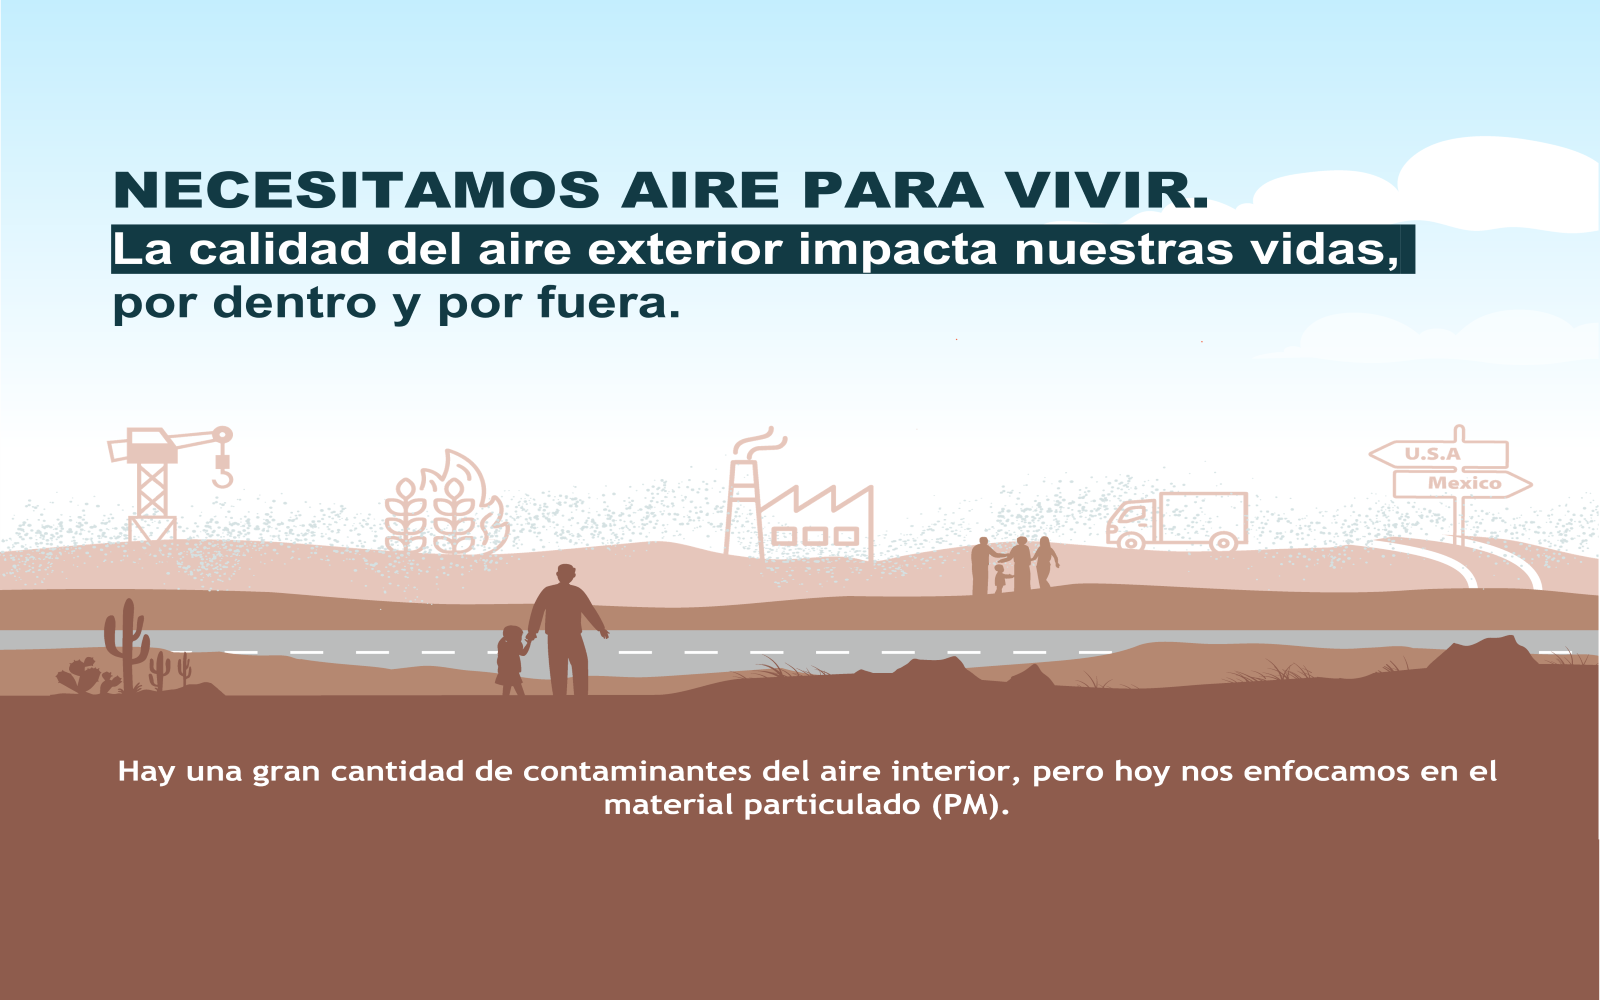 an illustration of a southwestern landscape next to air pollution sources that says "necesitamos aire para vivir."